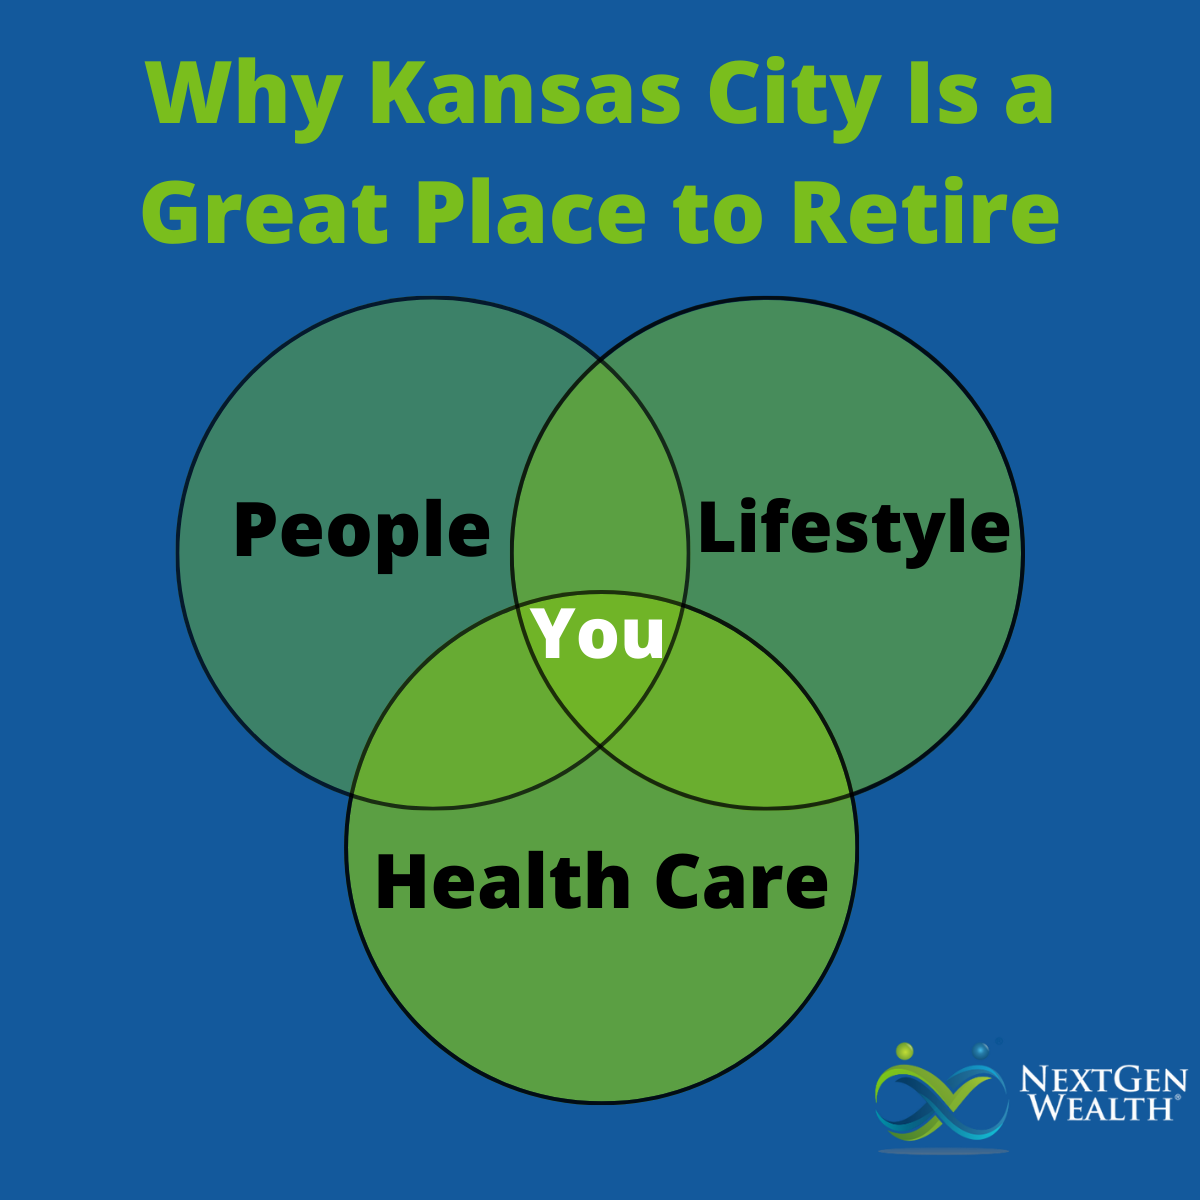 Why Kansas City is a Great Place to Retire